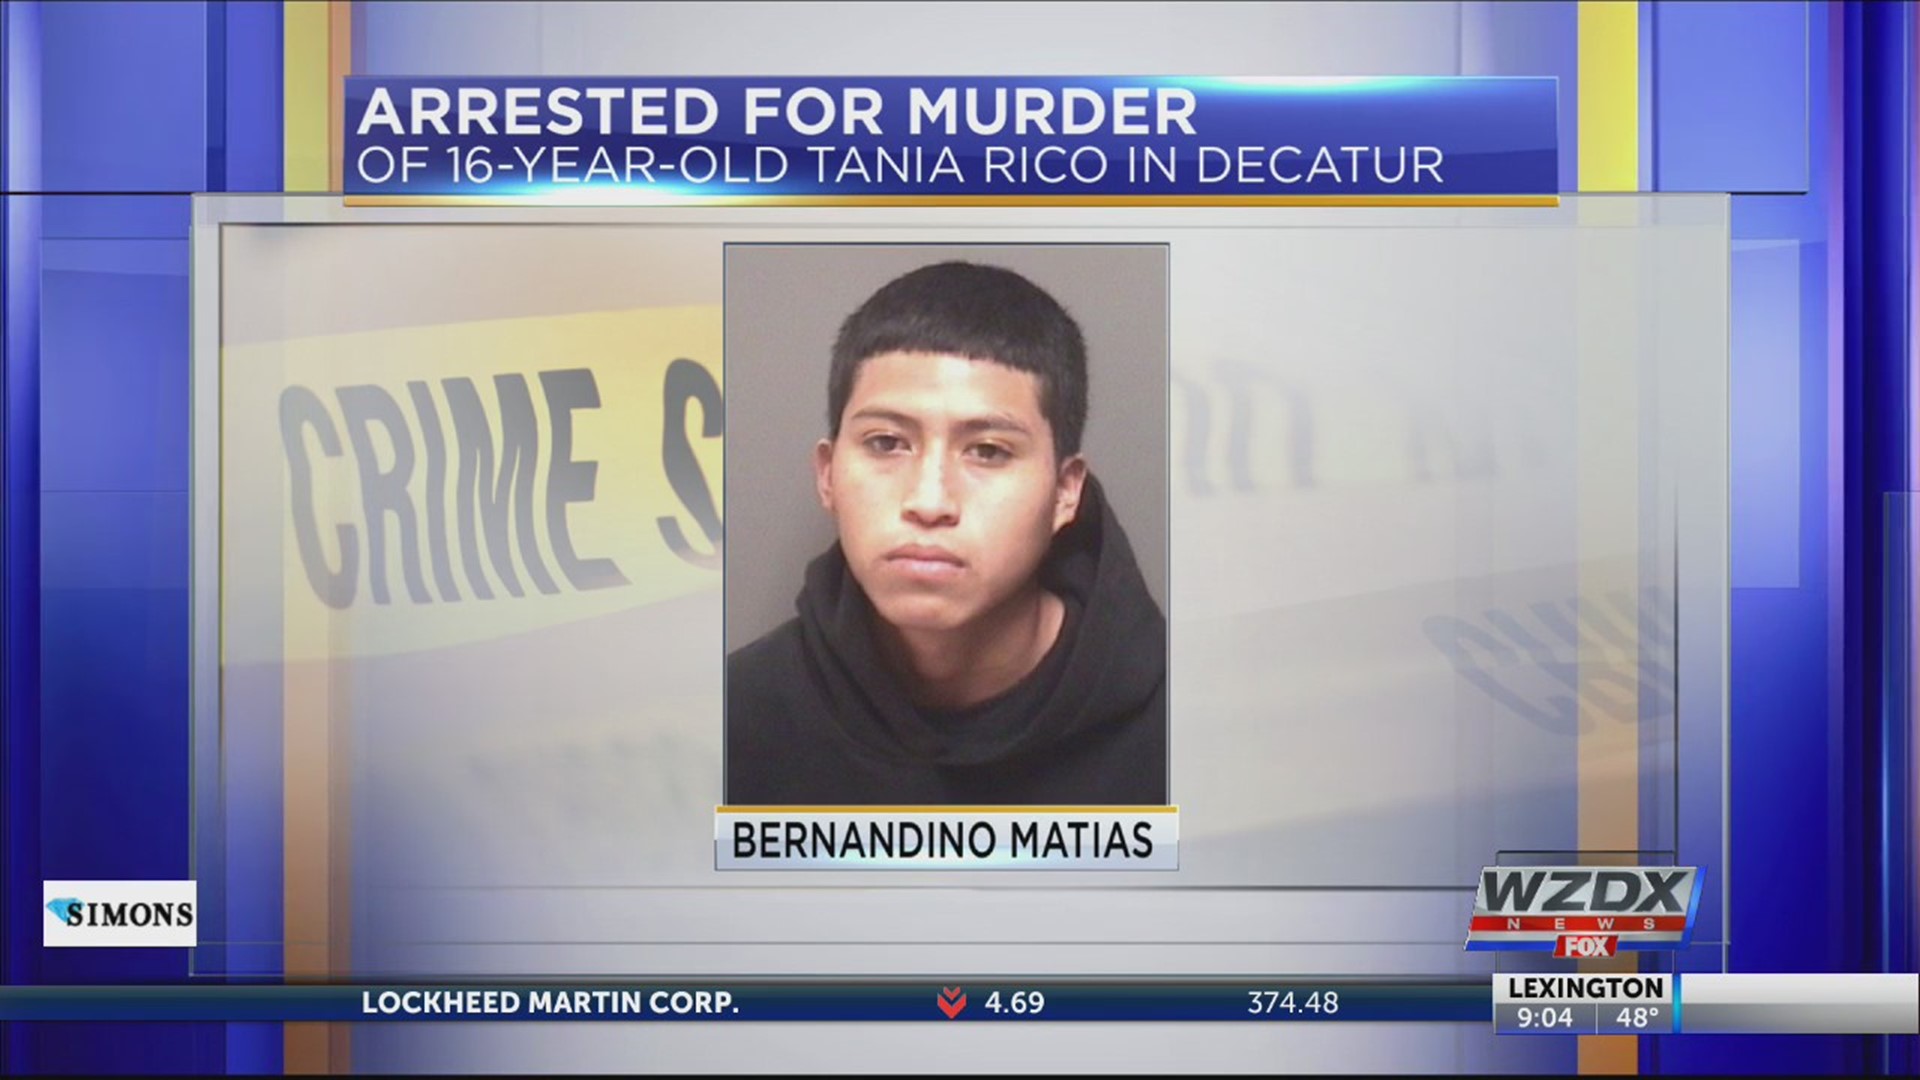 Authorities say Bernandino Matias has been extradited to Alabama and is now in the custody of the Morgan County Sheriff's Office.